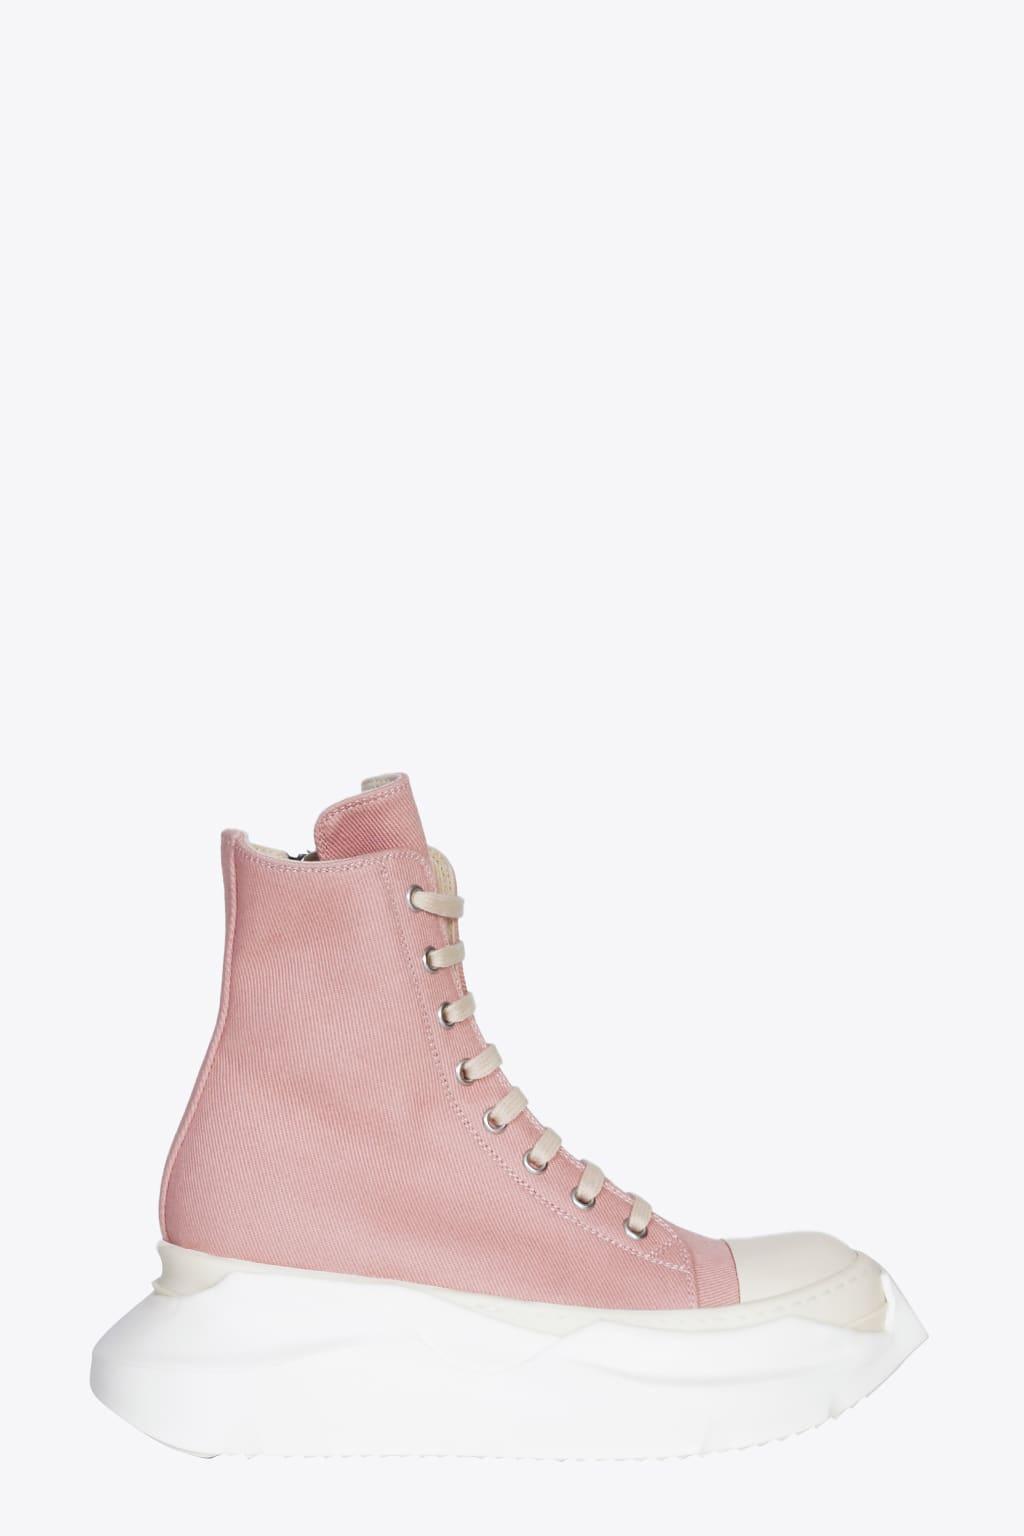 Rick Owens DRKSHDW Abstract Sneaks Faded Pink Canvas High Sneaker -  Abstract Sneak | Lyst